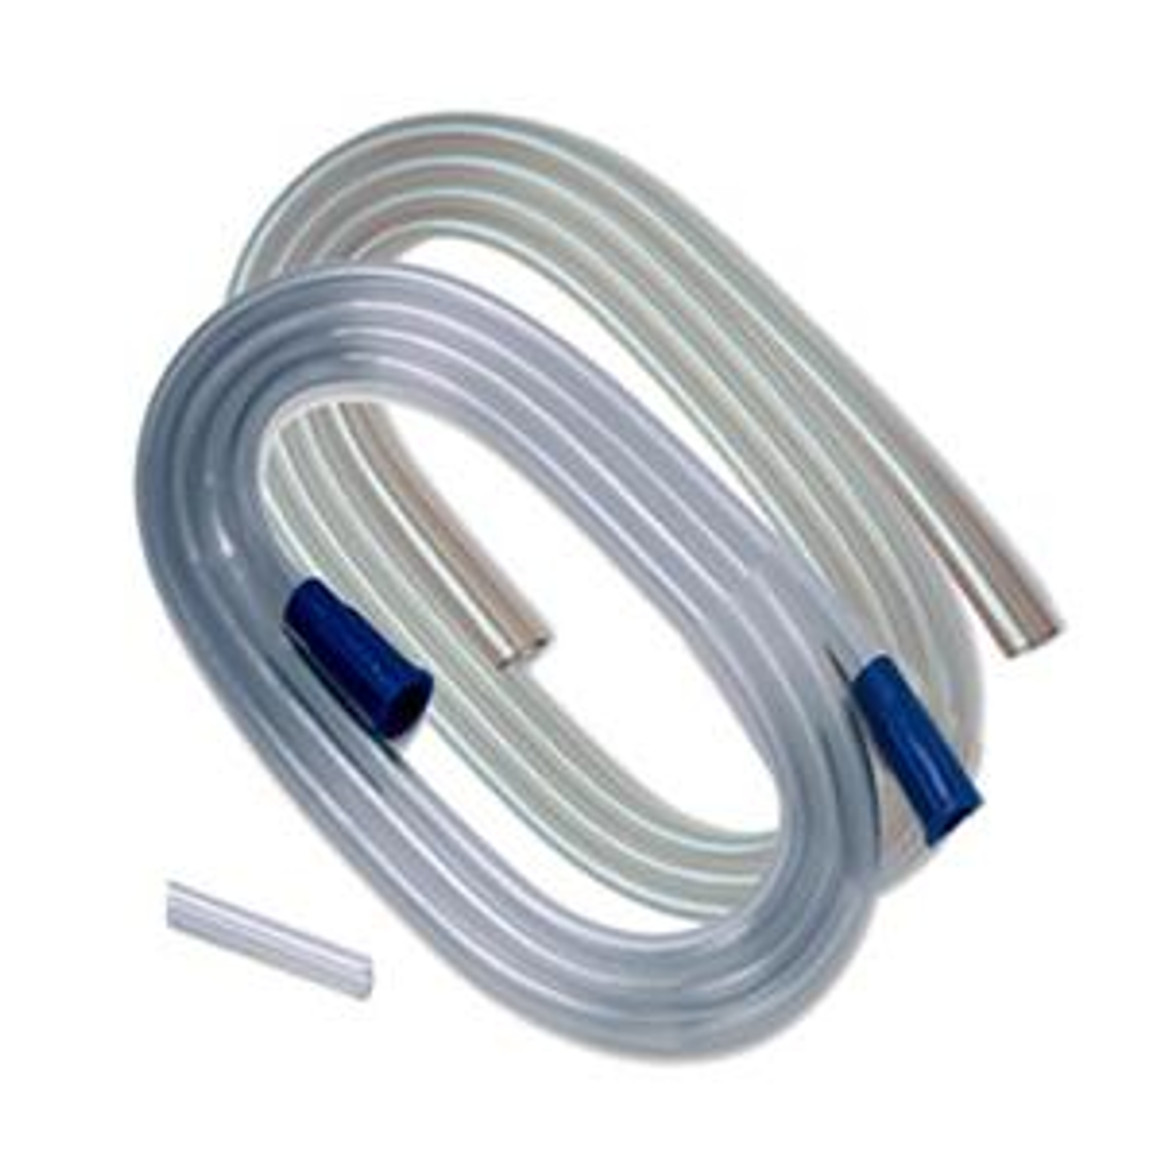 Kendall Argyle Sterile Connection Tube with Integral Connector, 3/16"x 6", Minimal Coil Memory